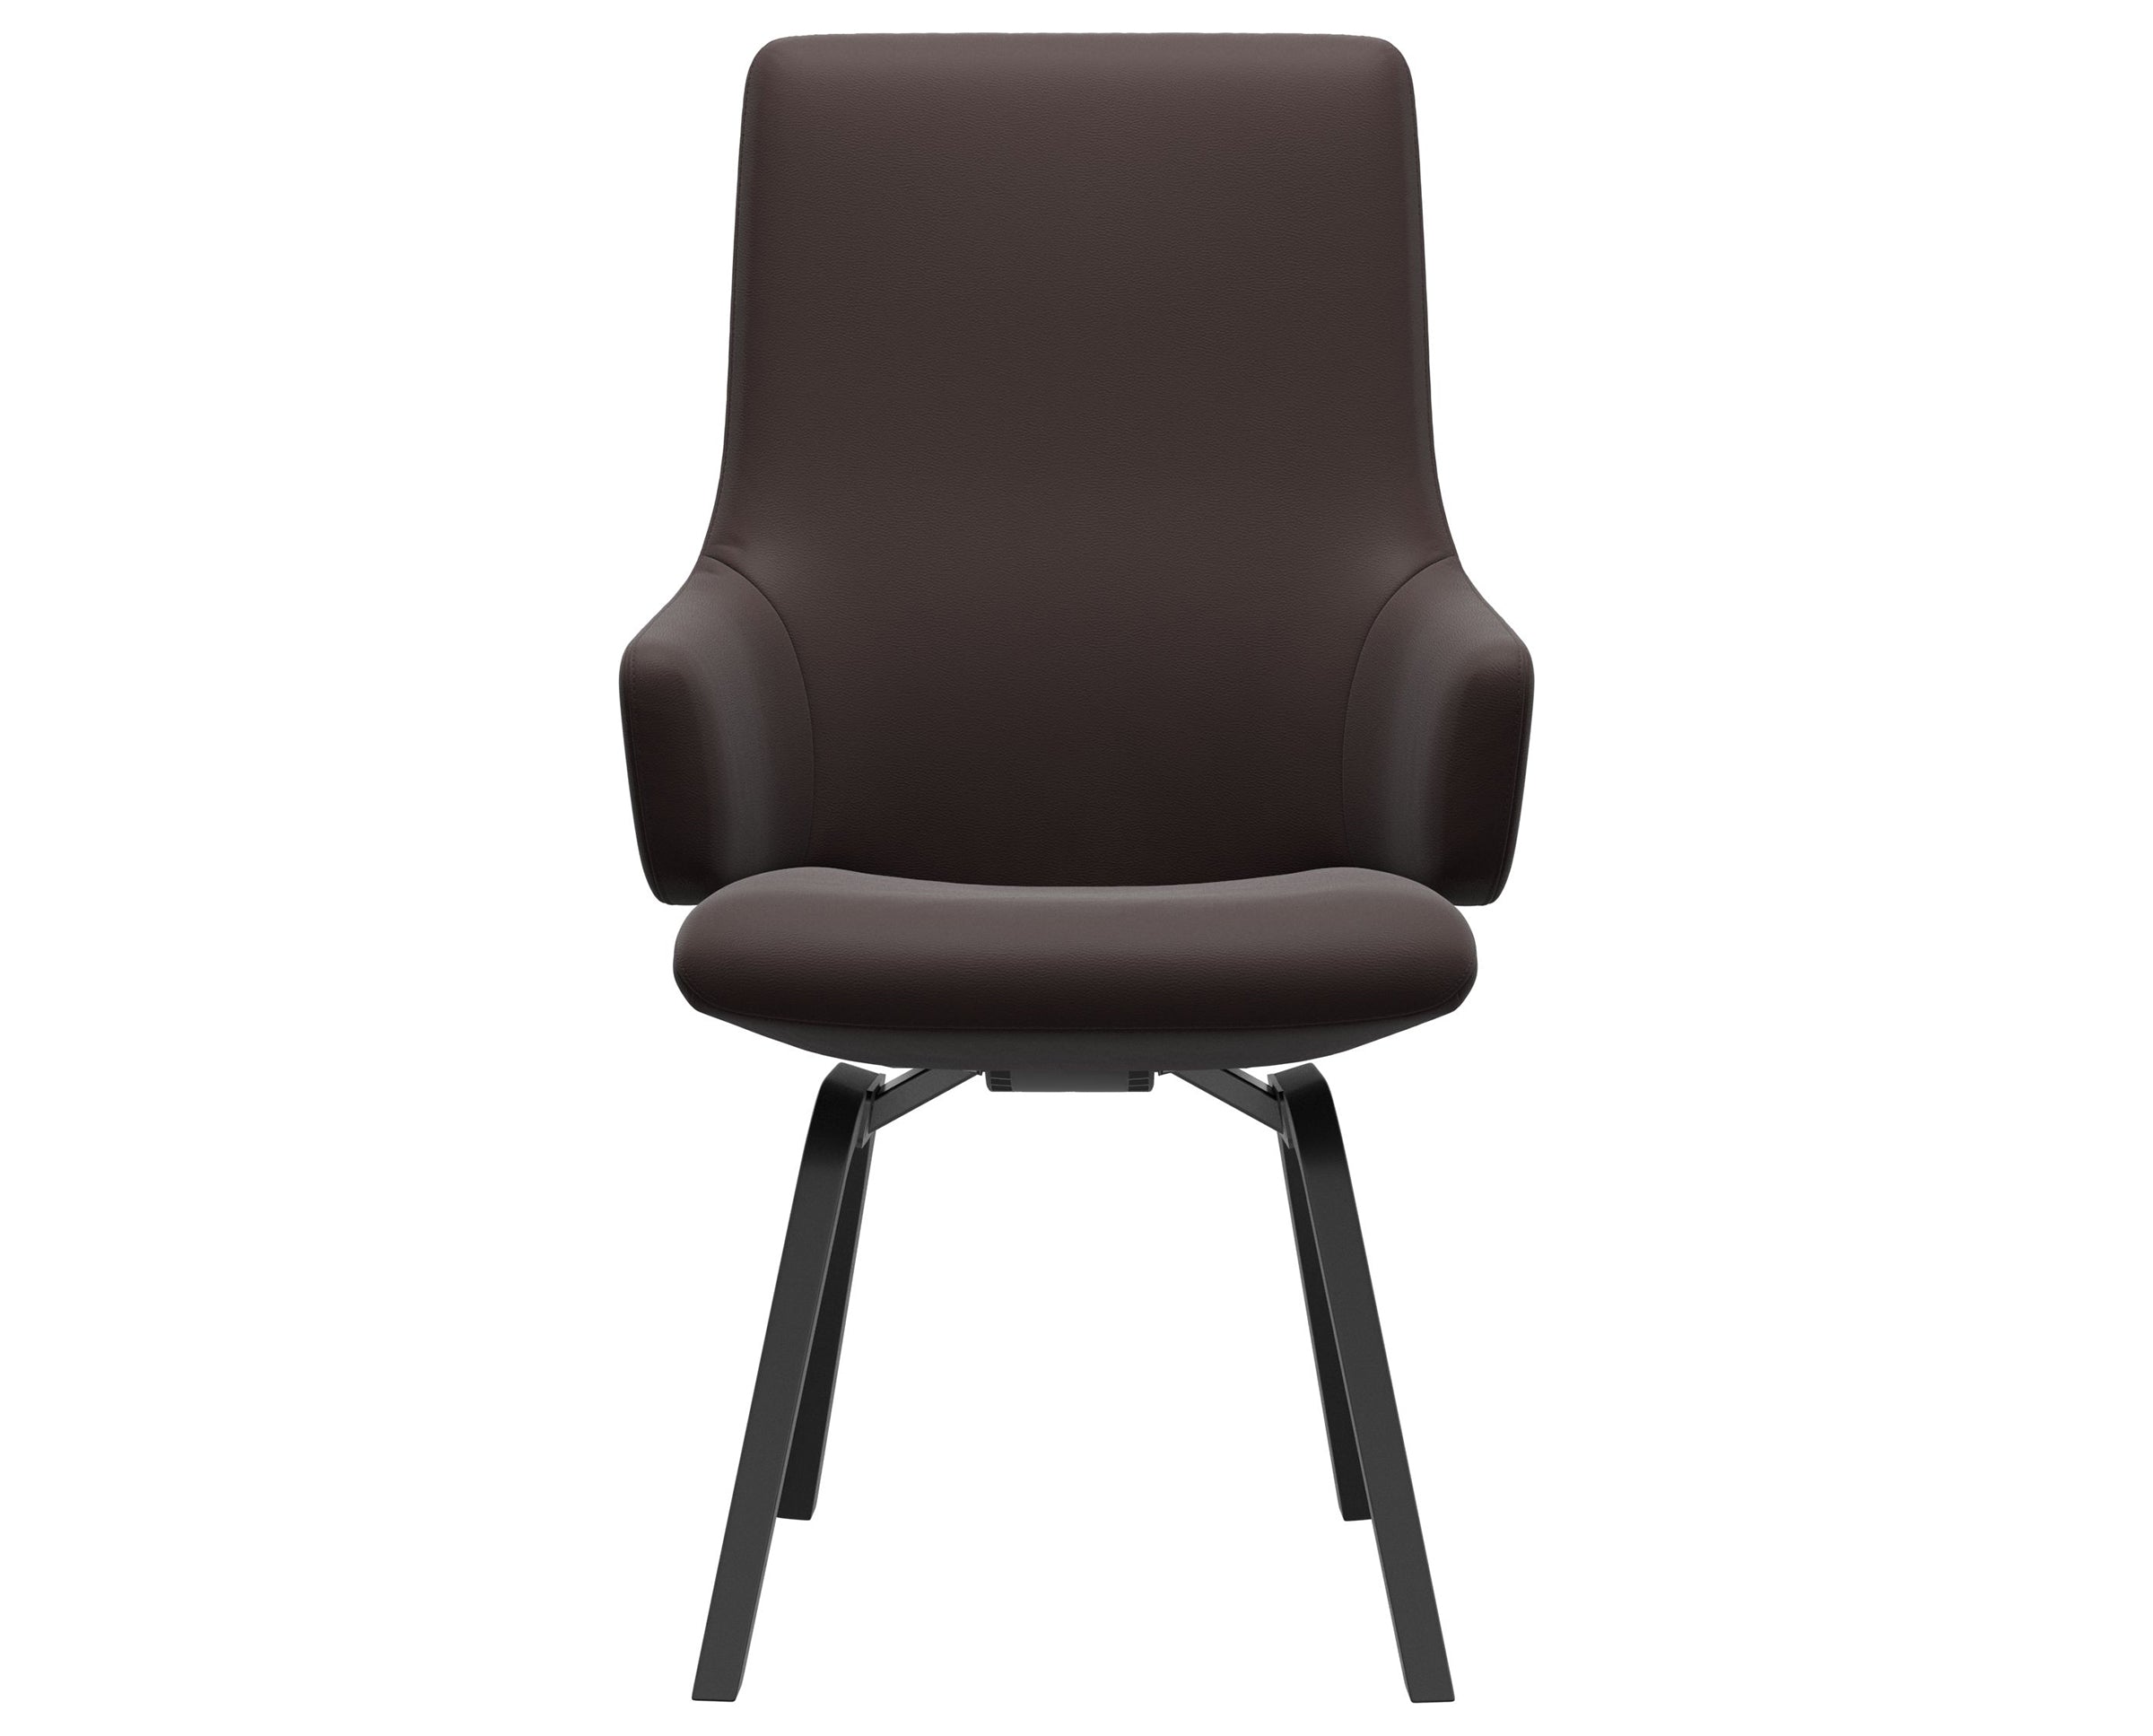 Paloma Leather Chocolate and Black Base | Stressless Laurel High Back D200 Dining Chair w/Arms | Valley Ridge Furniture